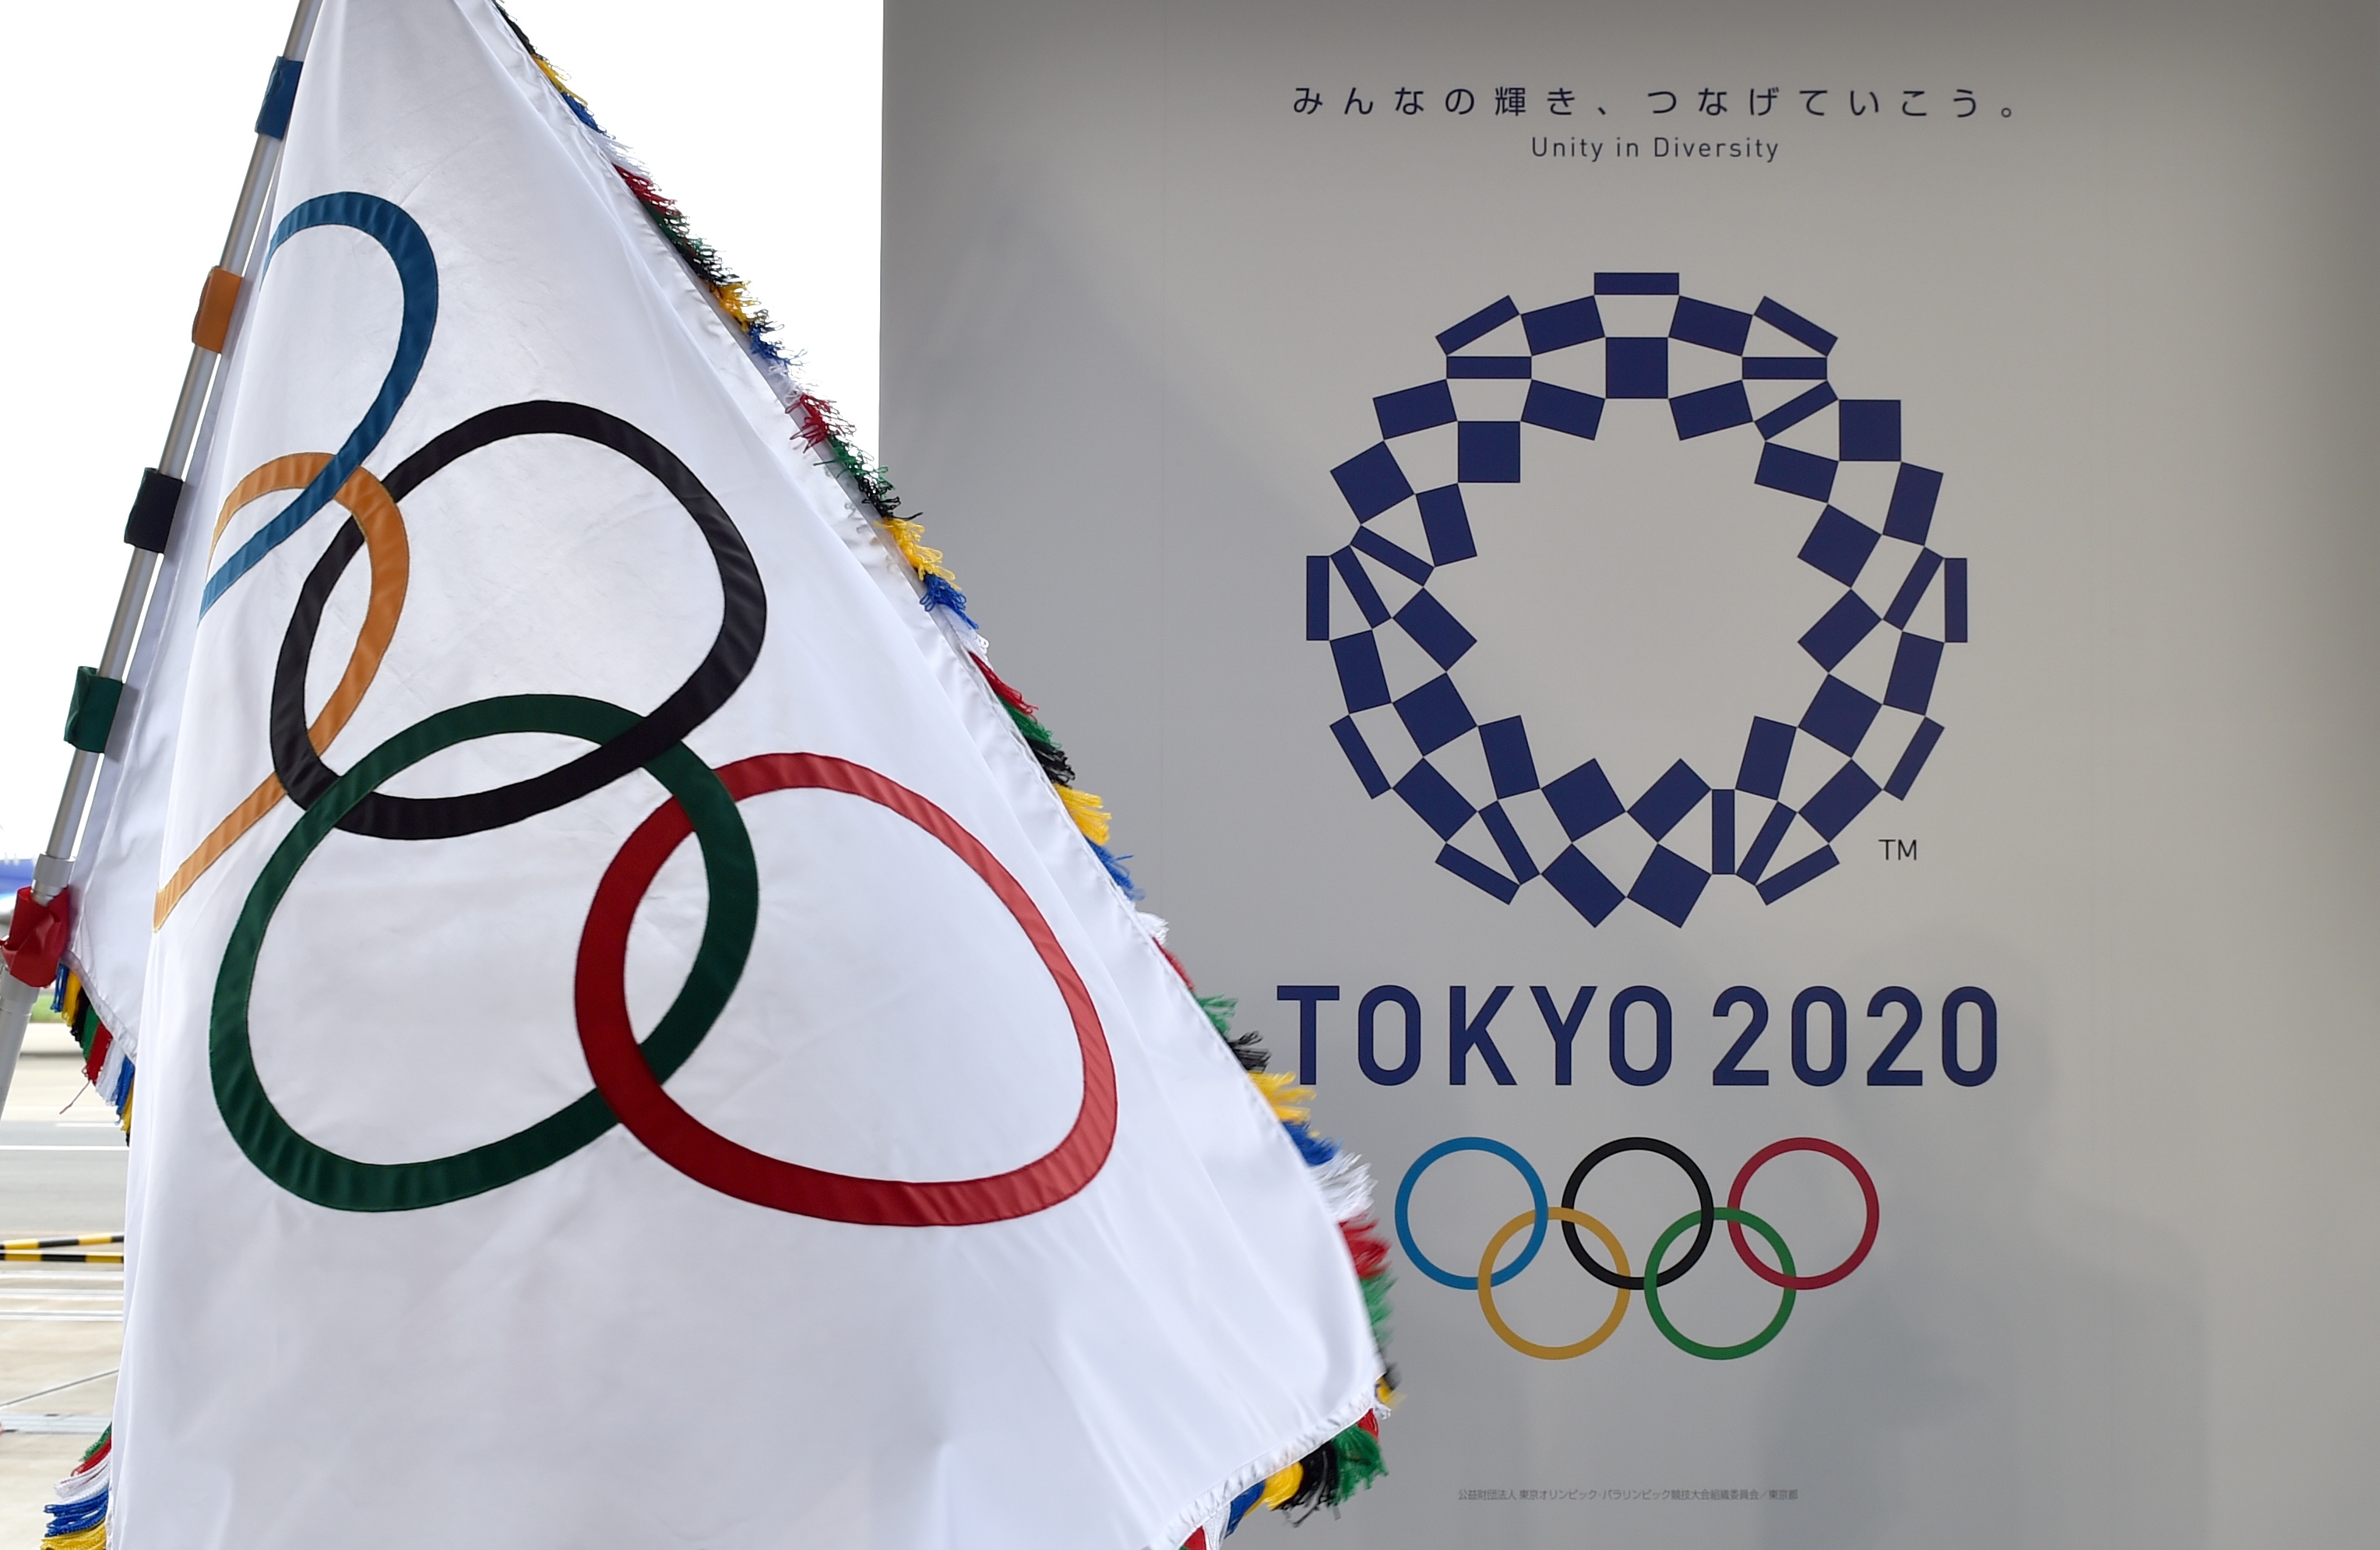 The Olympic flag (L) and the logo of the Tokyo 2020 are displayed during the official flag arrival ceremony at the Tokyo's Haneda airport on August 24, 2016. The Olympic flag arrived in Tokyo on August 24, as Japan's capital gears up to host the 2020 Games, with officials promising smooth sailing after Rio's sometimes shaky 2016 instalment. / AFP PHOTO / KAZUHIRO NOGI